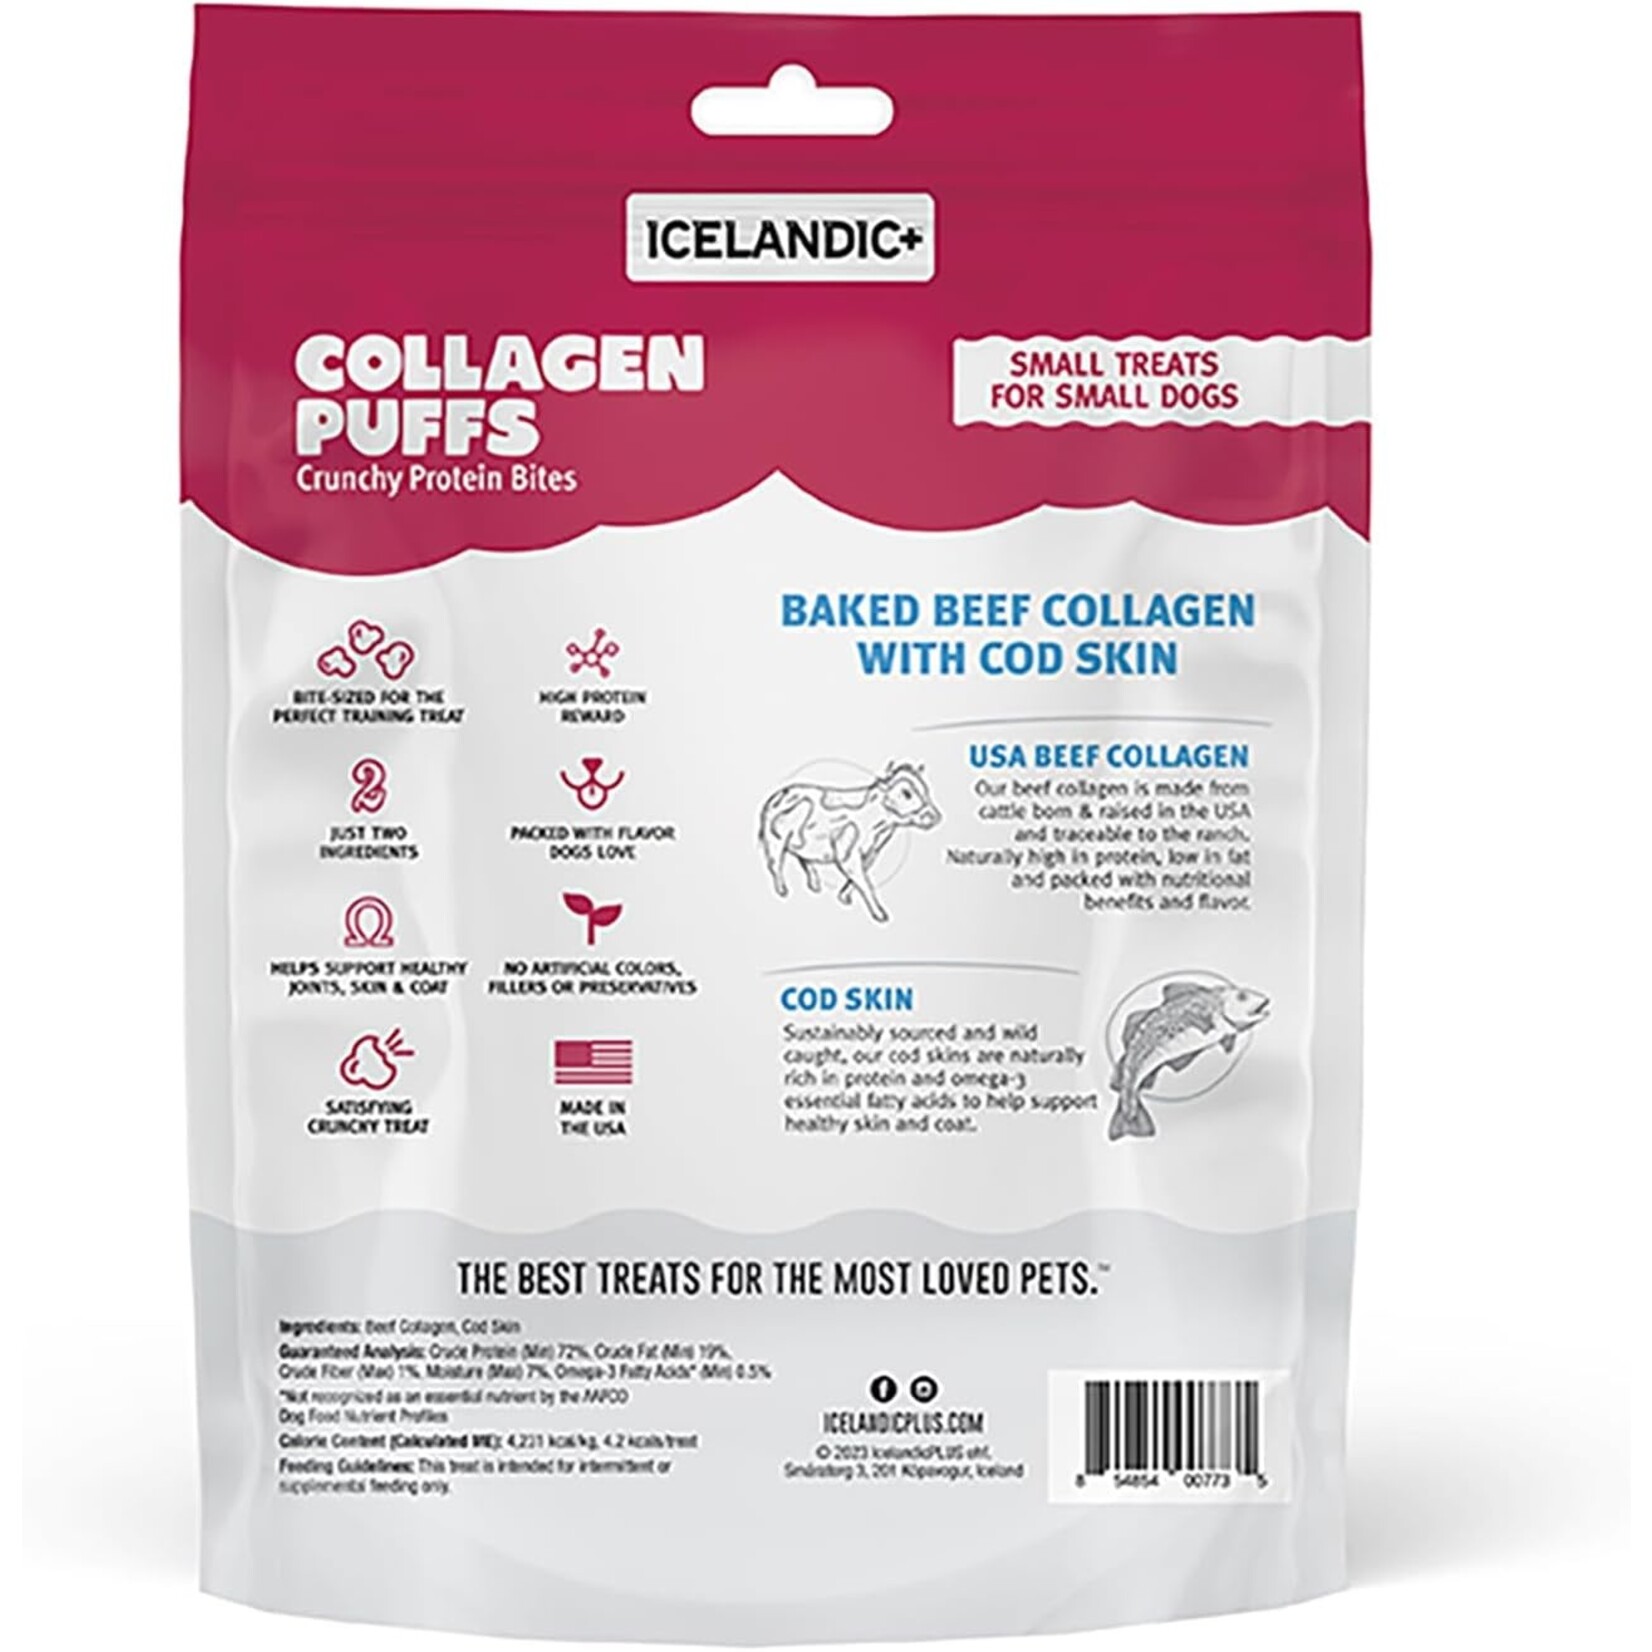 Icelandic+ Icelandic+ Beef Collagen Puffs with Cod Skin Treats for Small Dogs 1.3oz